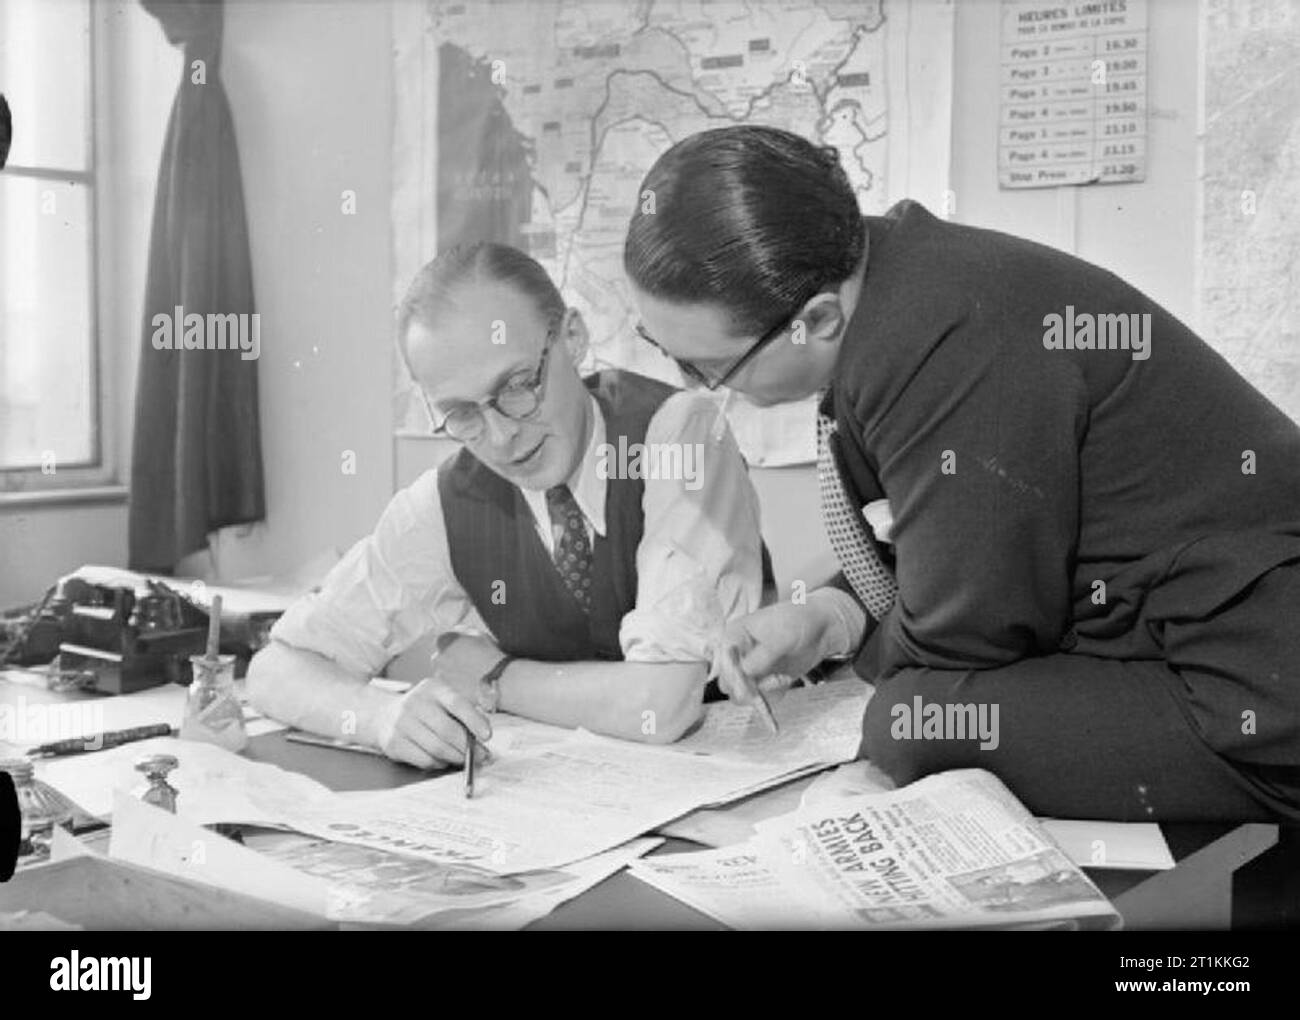 French Newspaper in Britain- Wartime News and Propaganda, England, 1942 Andre Rabsche (left) and Charles Gombault, General Secretaries of the newspaper 'France' discuss the layout of the next edition at their office in London. Stock Photo